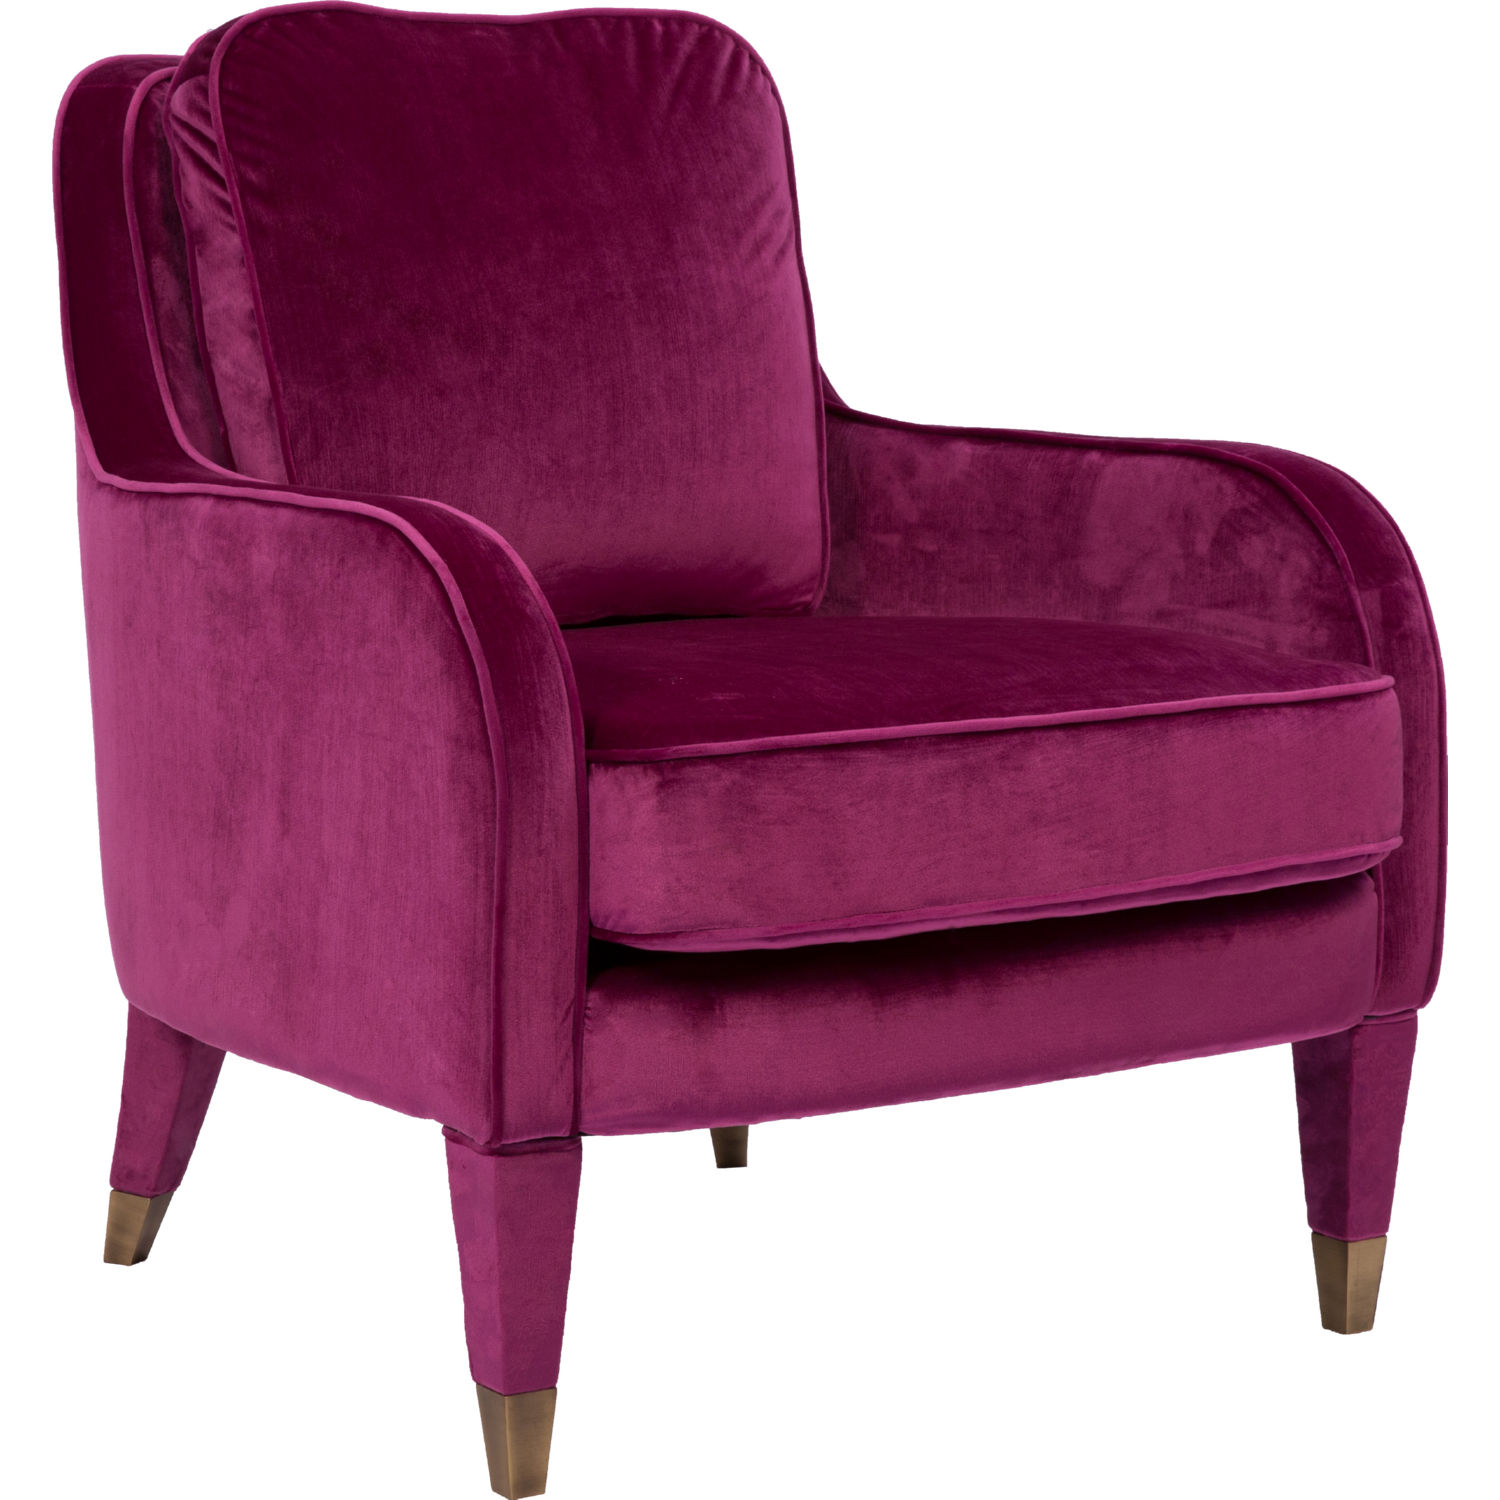 Chic Iconic Fac2819 Dr Tzivia Accent Chair In Plum Velvet